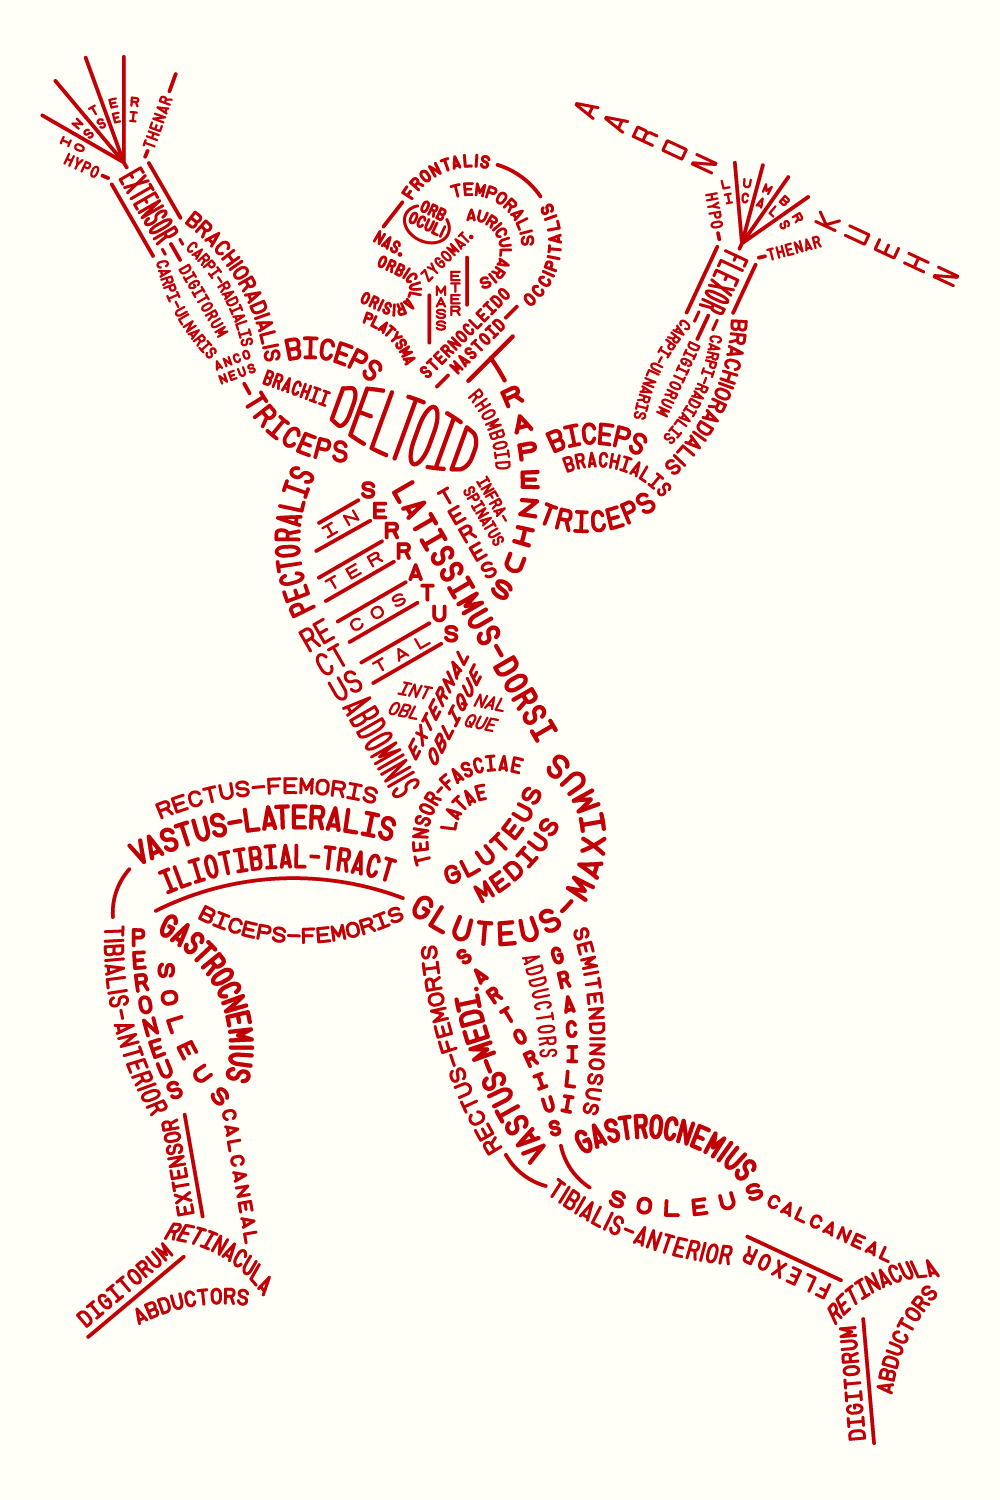 An anatomical diagram and model of the human muscular system in a spear throwing pose, composed of the names of the muscles using typography.